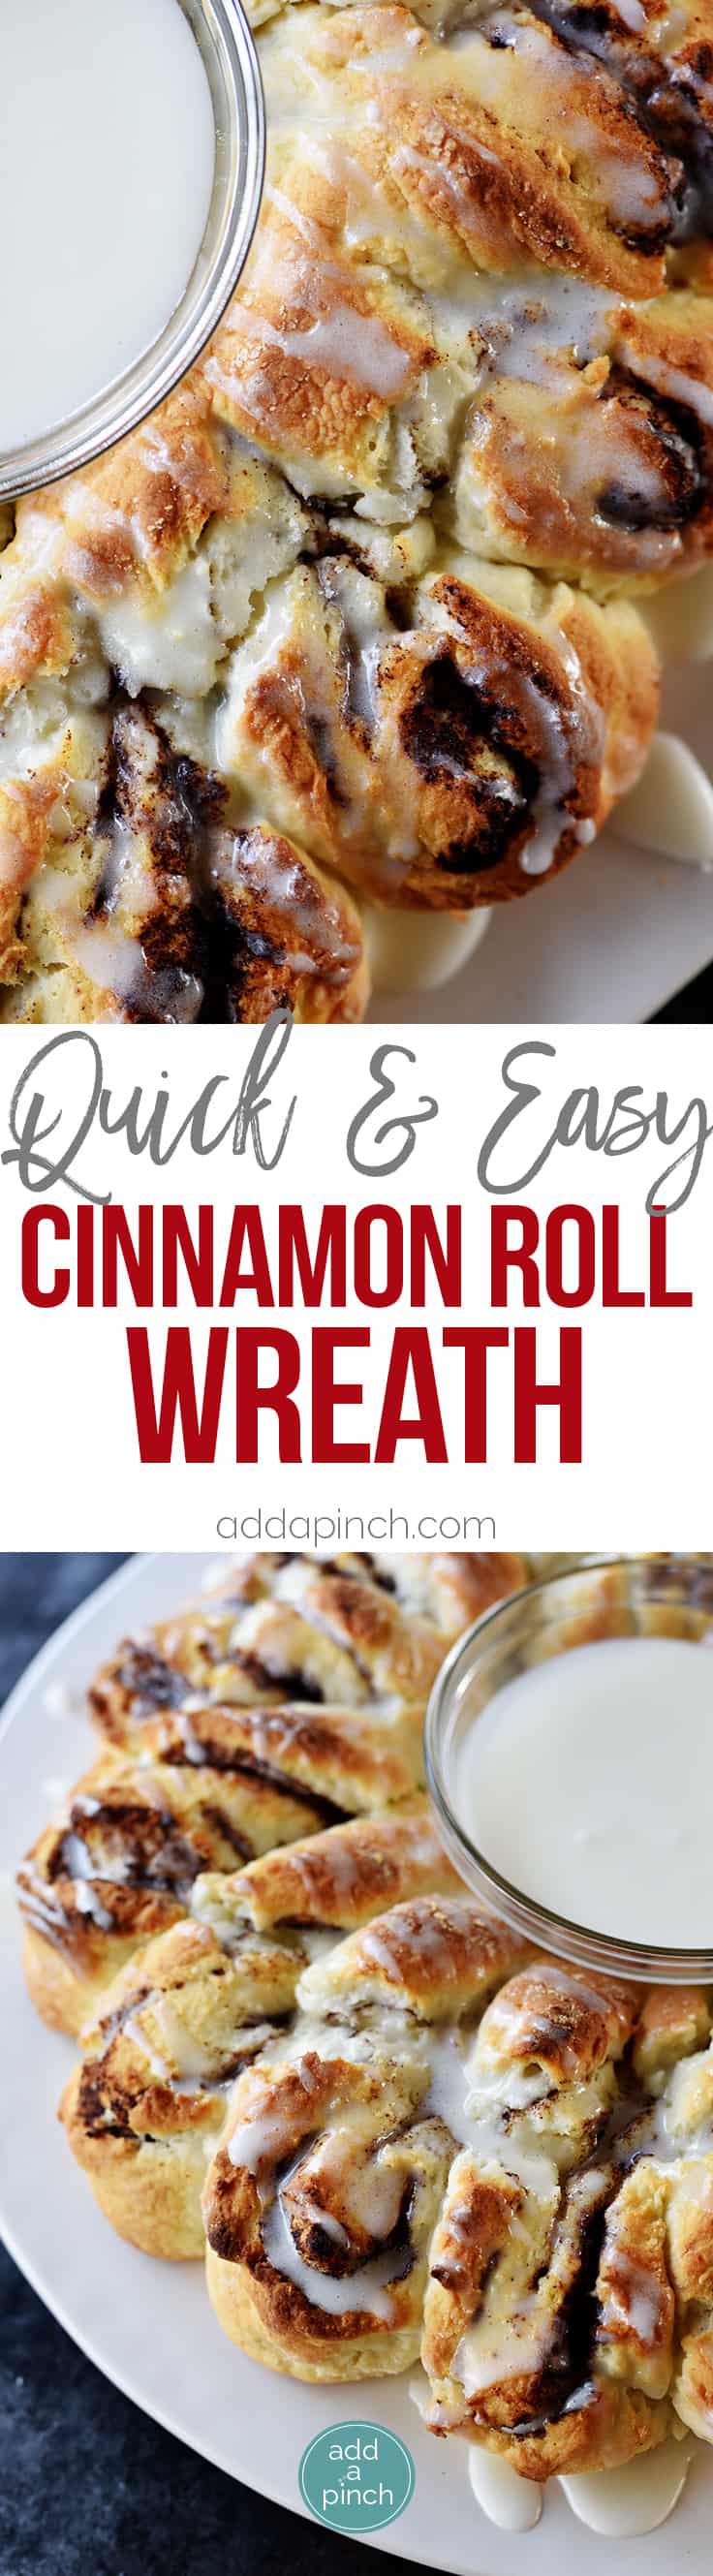 Cinnamon Roll Biscuit Wreath Recipe - Quick and easy this treat has everything you love about a cinnamon roll with the ease of a biscuit in the shape of a festive wreath! // addapinch.com